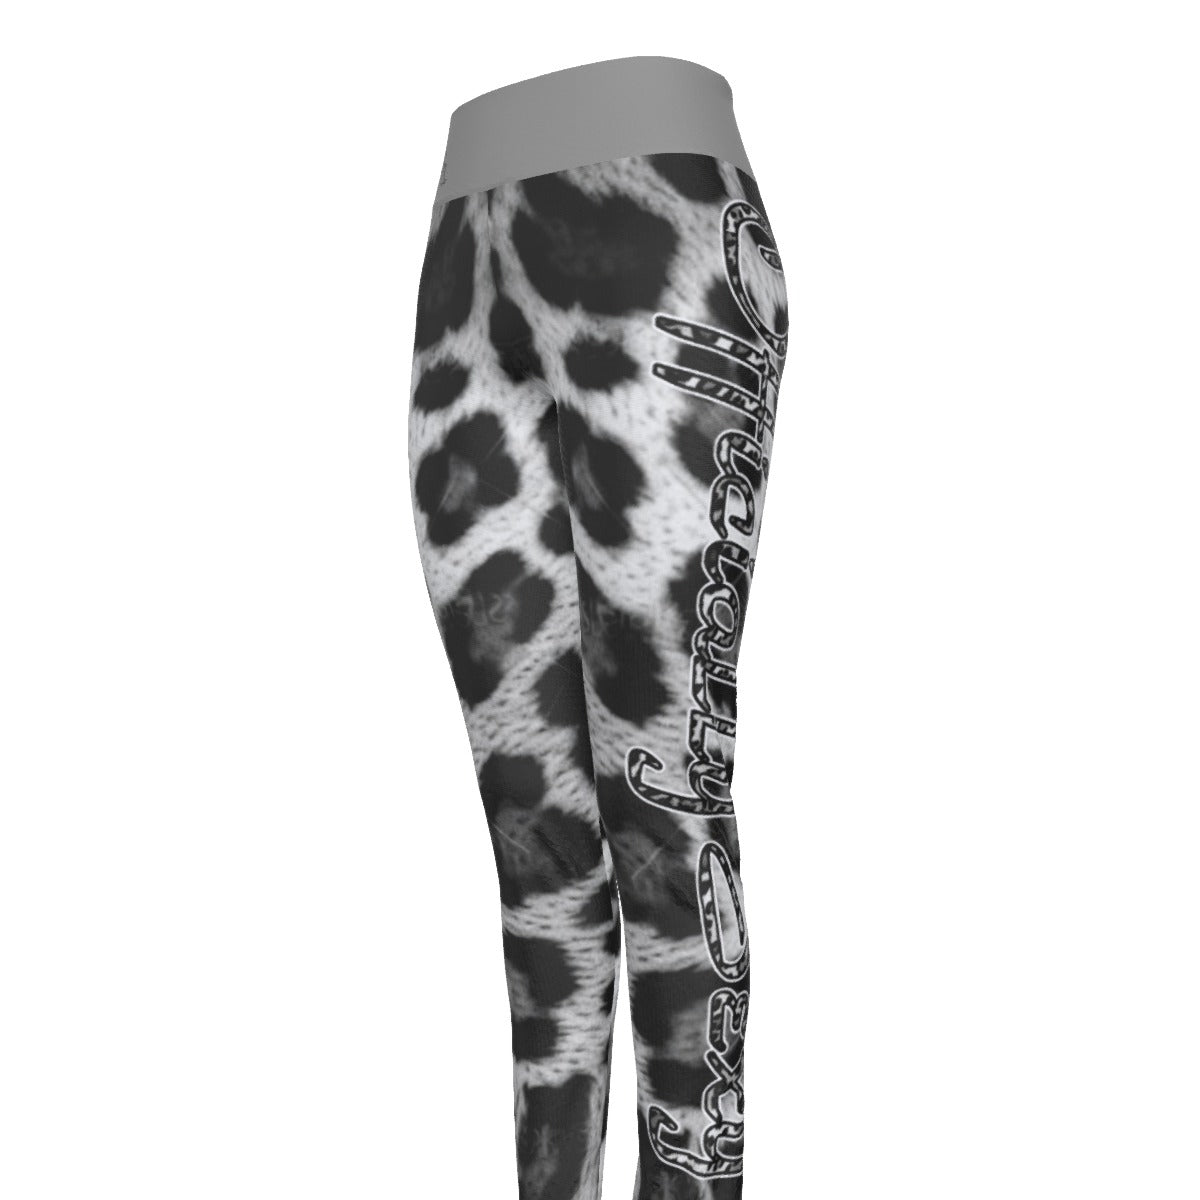 Officially Sexy Snow Leopard Print Collection Women's Grey High Waist Leggings #2 (English) 4